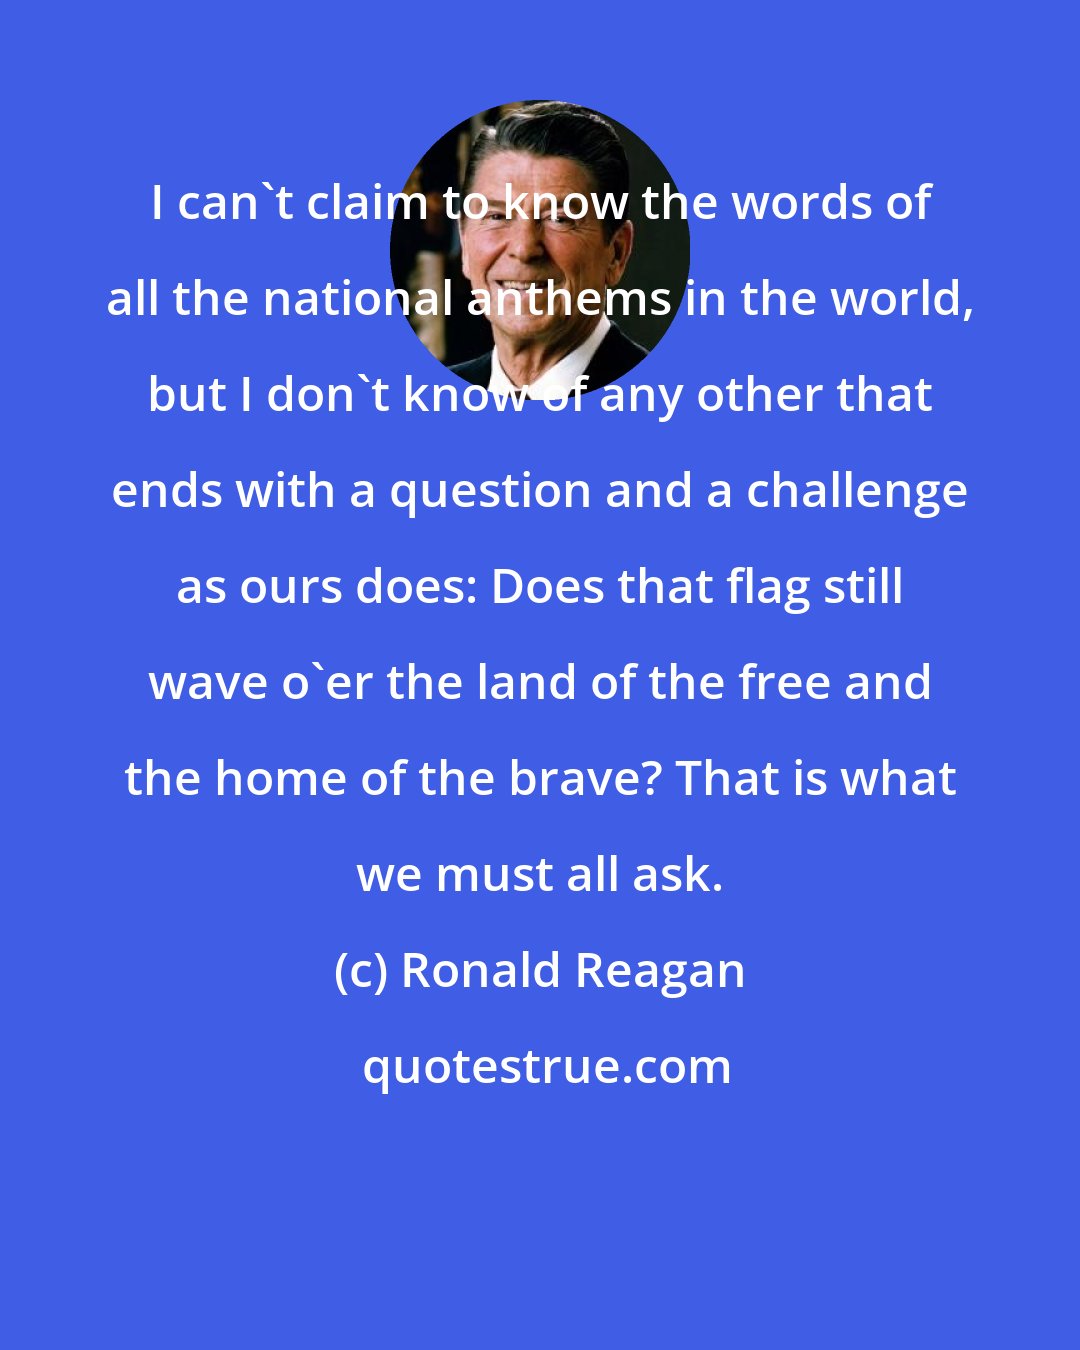 Ronald Reagan: I can't claim to know the words of all the national anthems in the world, but I don't know of any other that ends with a question and a challenge as ours does: Does that flag still wave o'er the land of the free and the home of the brave? That is what we must all ask.